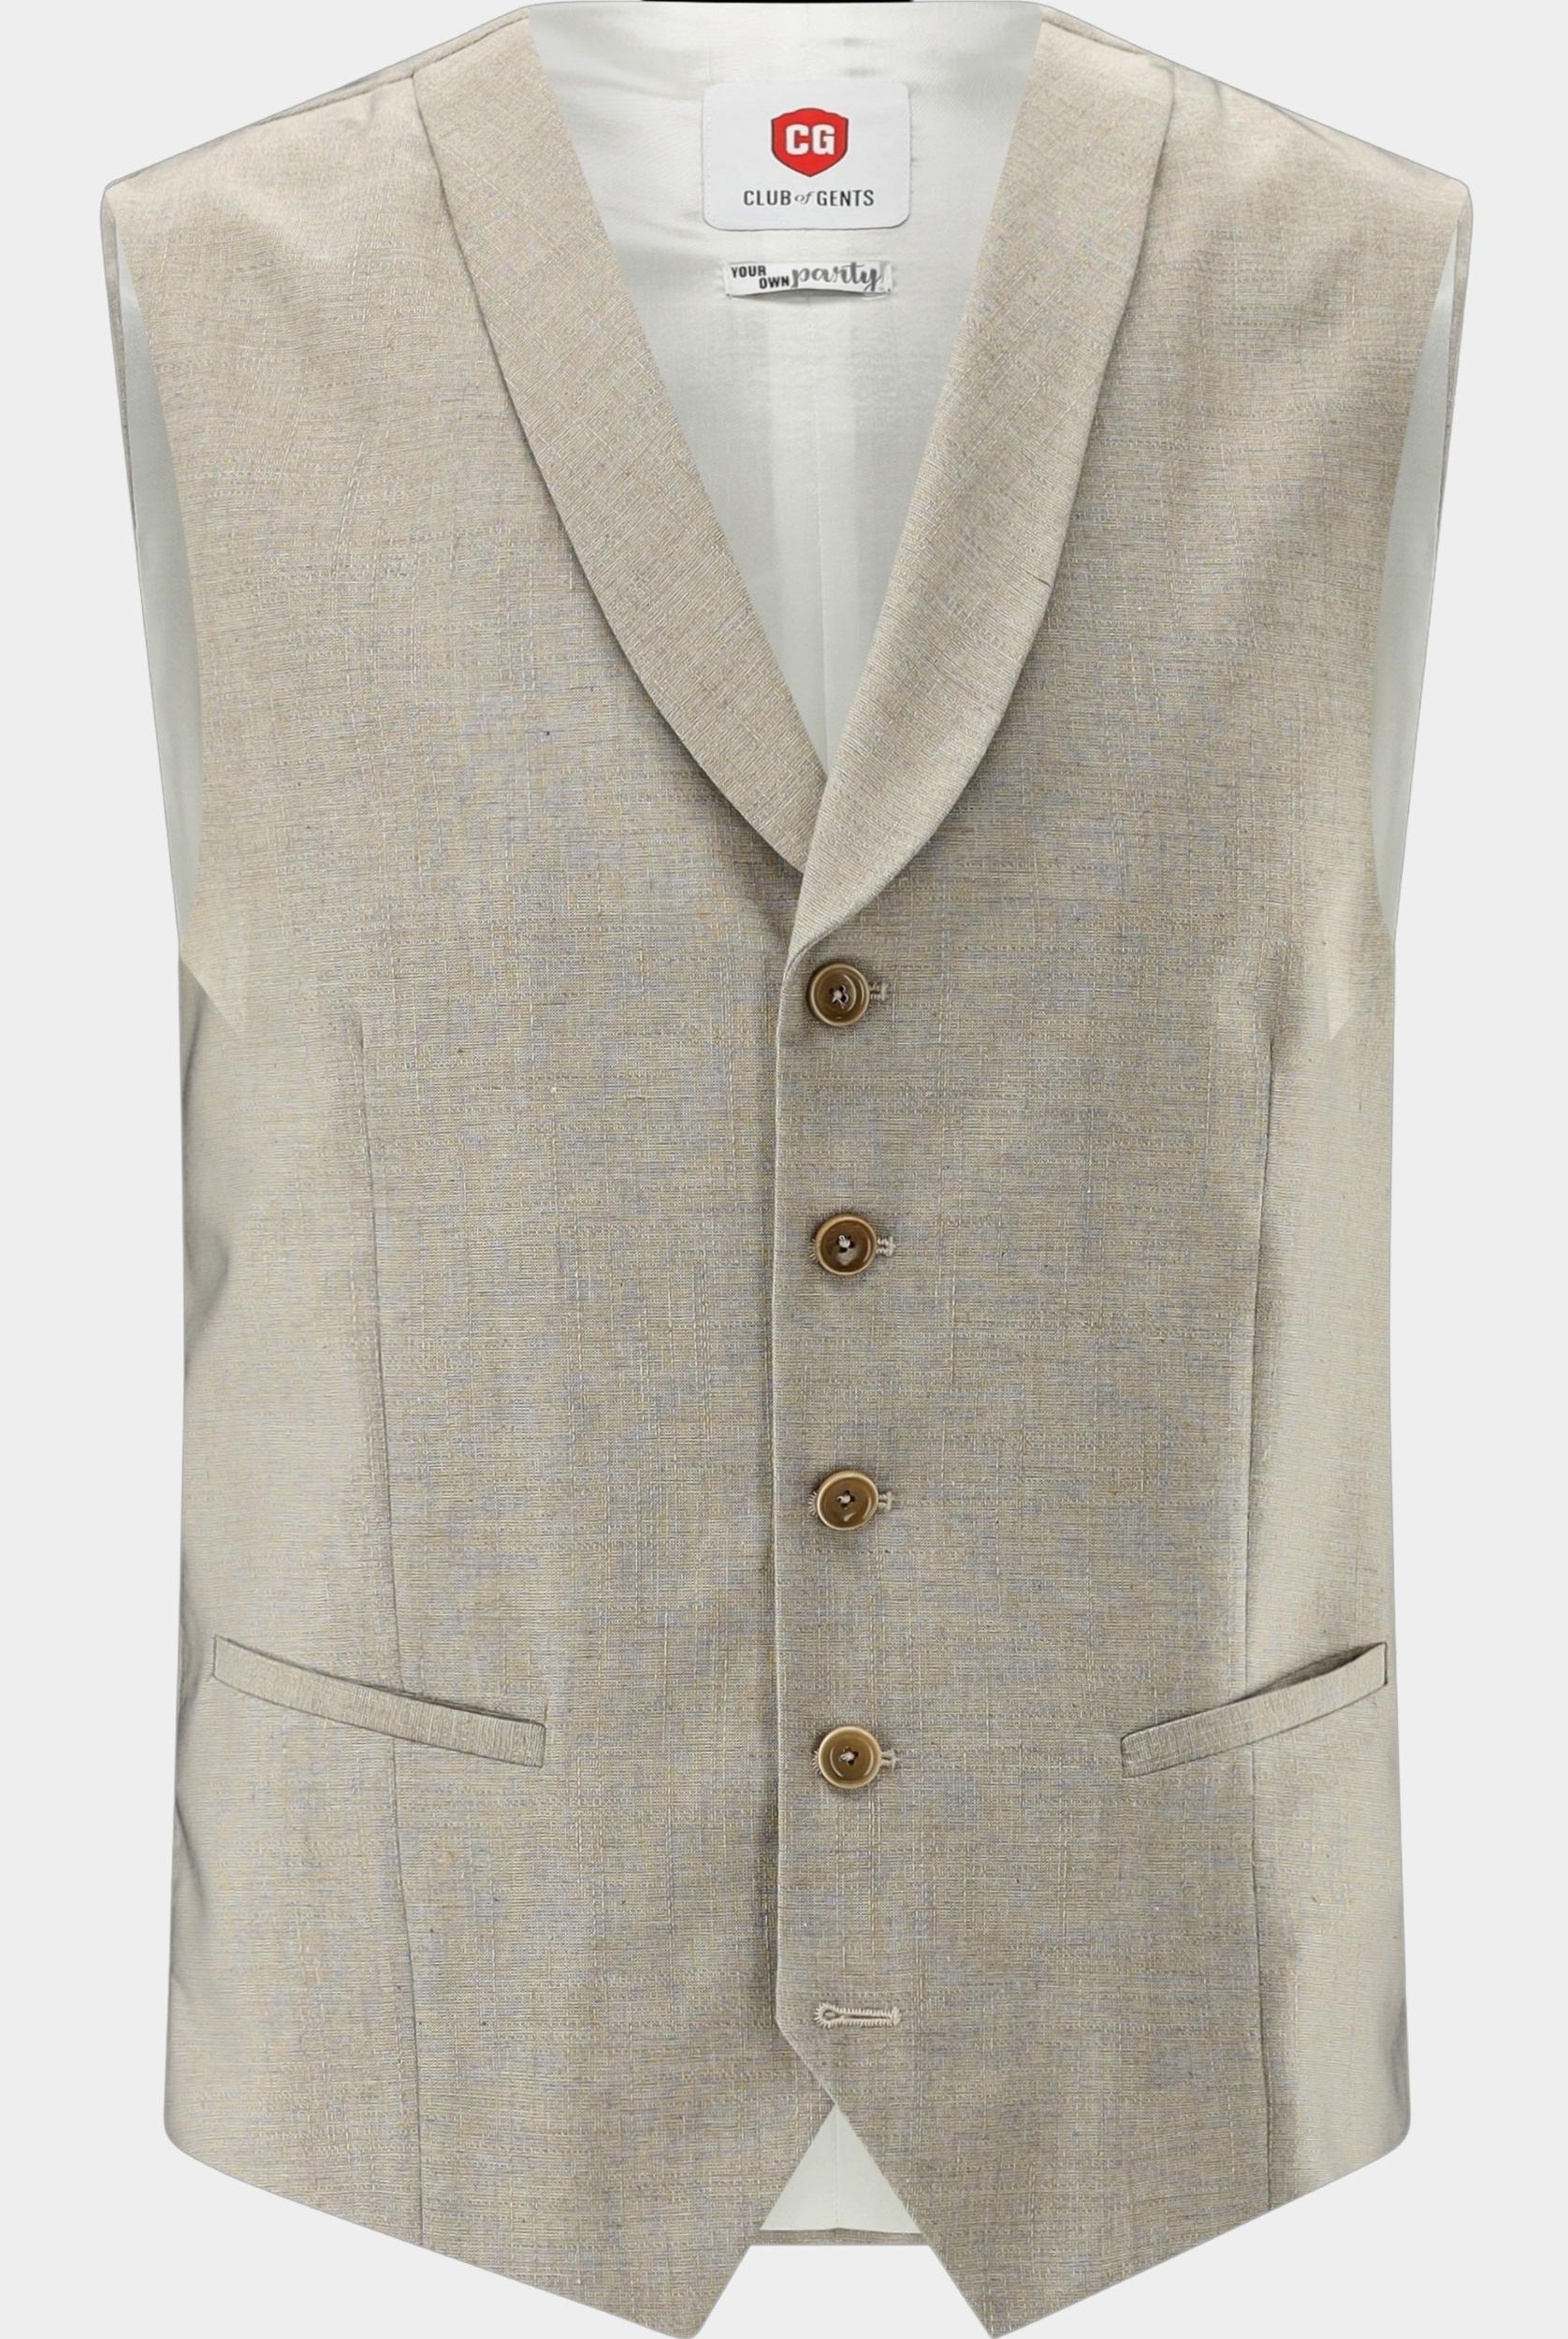 Your own Party By CG - Cl Gilet Mix & Match Beige Weste/Waistcoat CG Paddy-N 20.170S0 / 440063/22